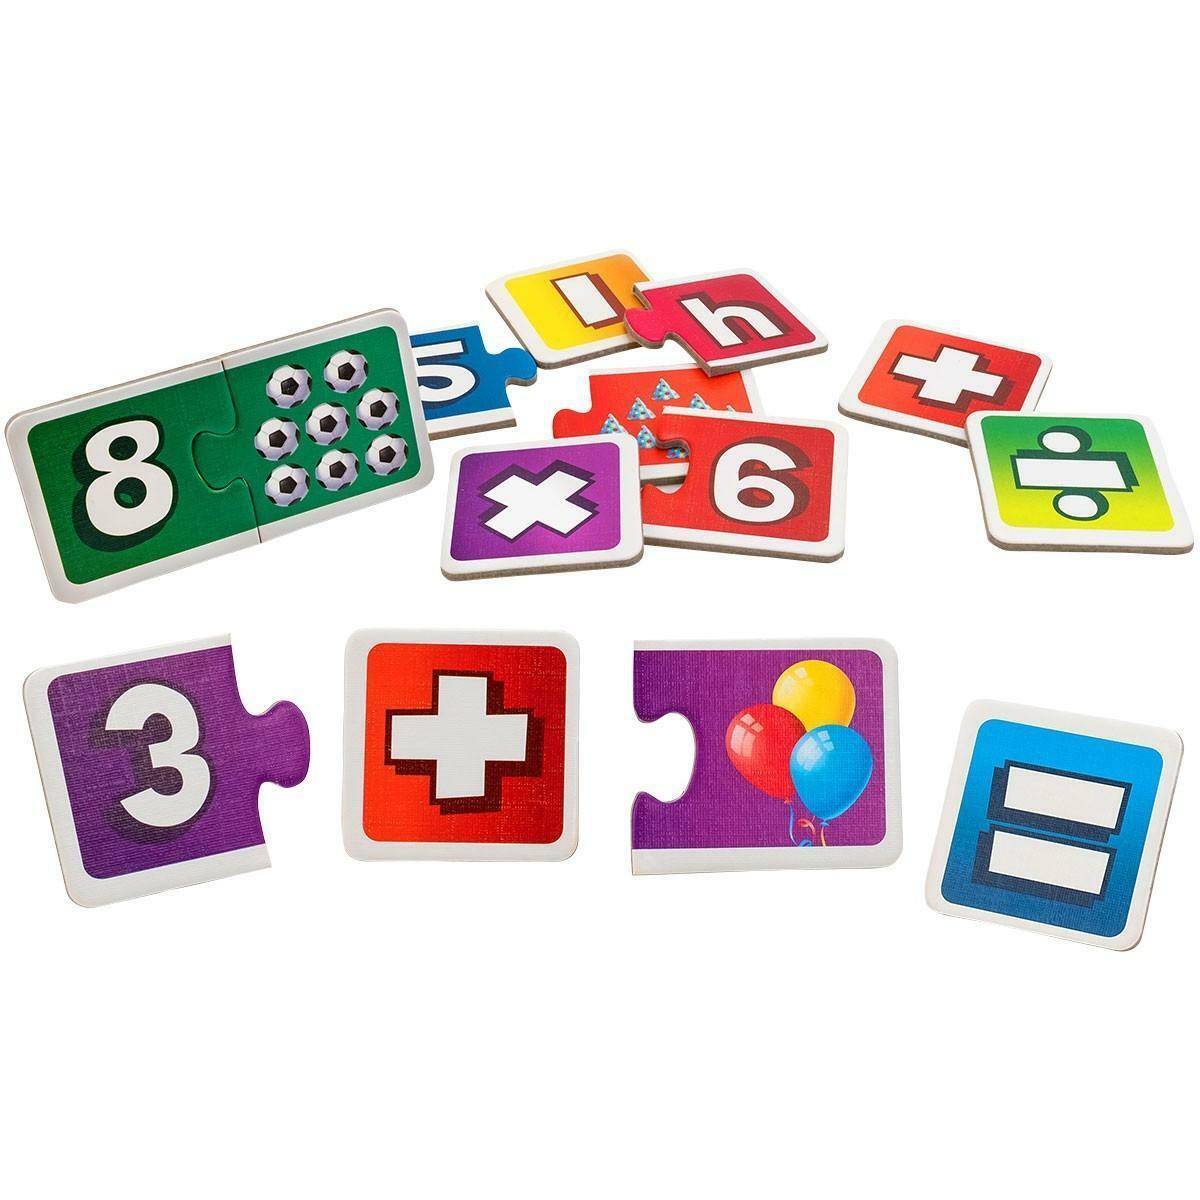 globo globo family games puzzle numbers